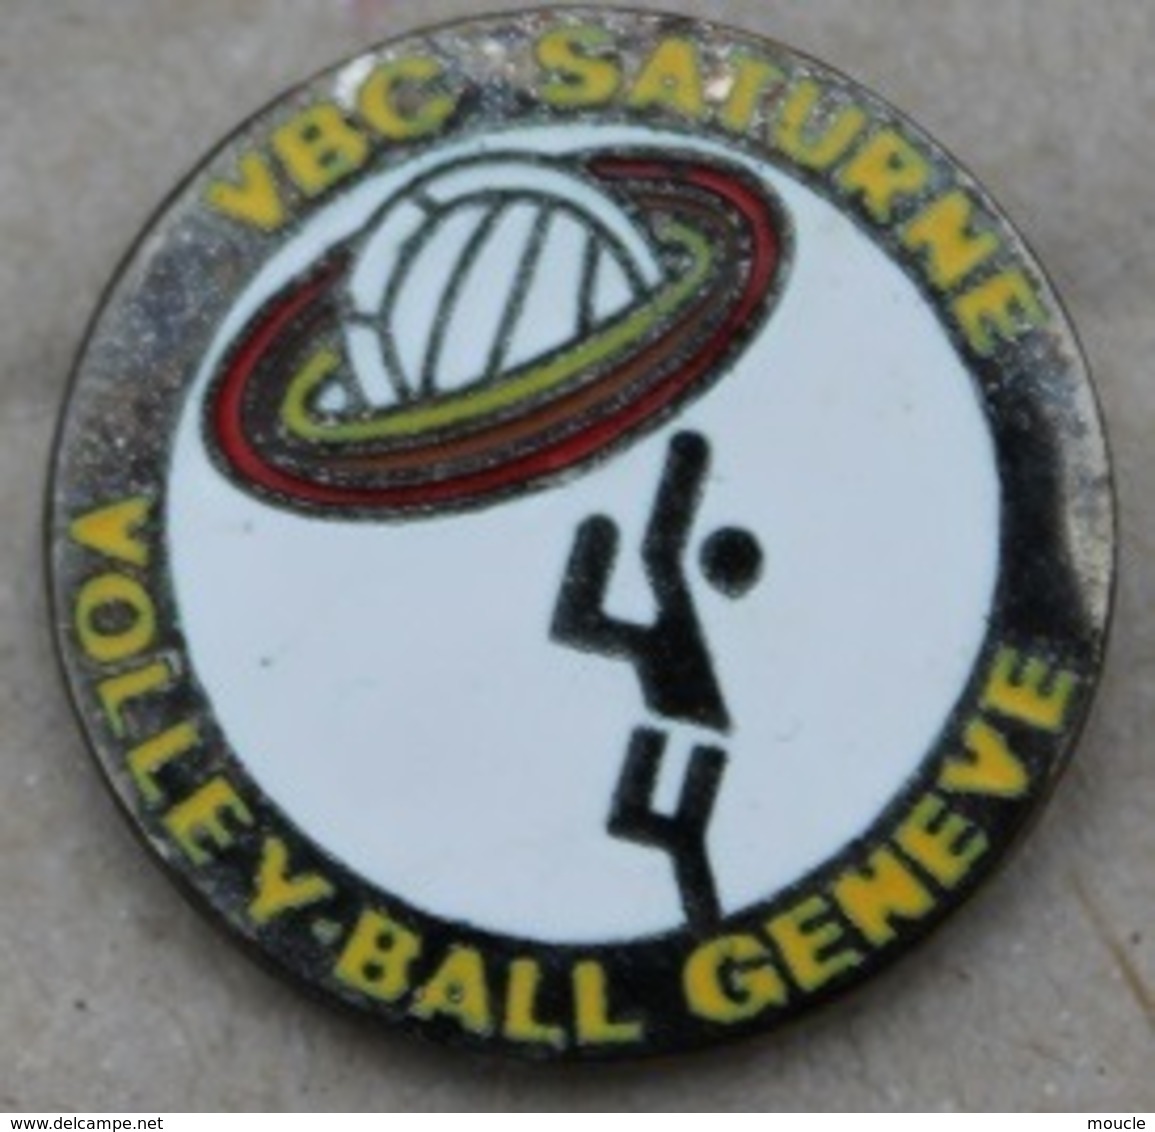 VBC SATURNE  GENEVE  - SUISSE - BALLON - VOLLEYBALL - VOLLEY BALL -              (20) - Volleybal